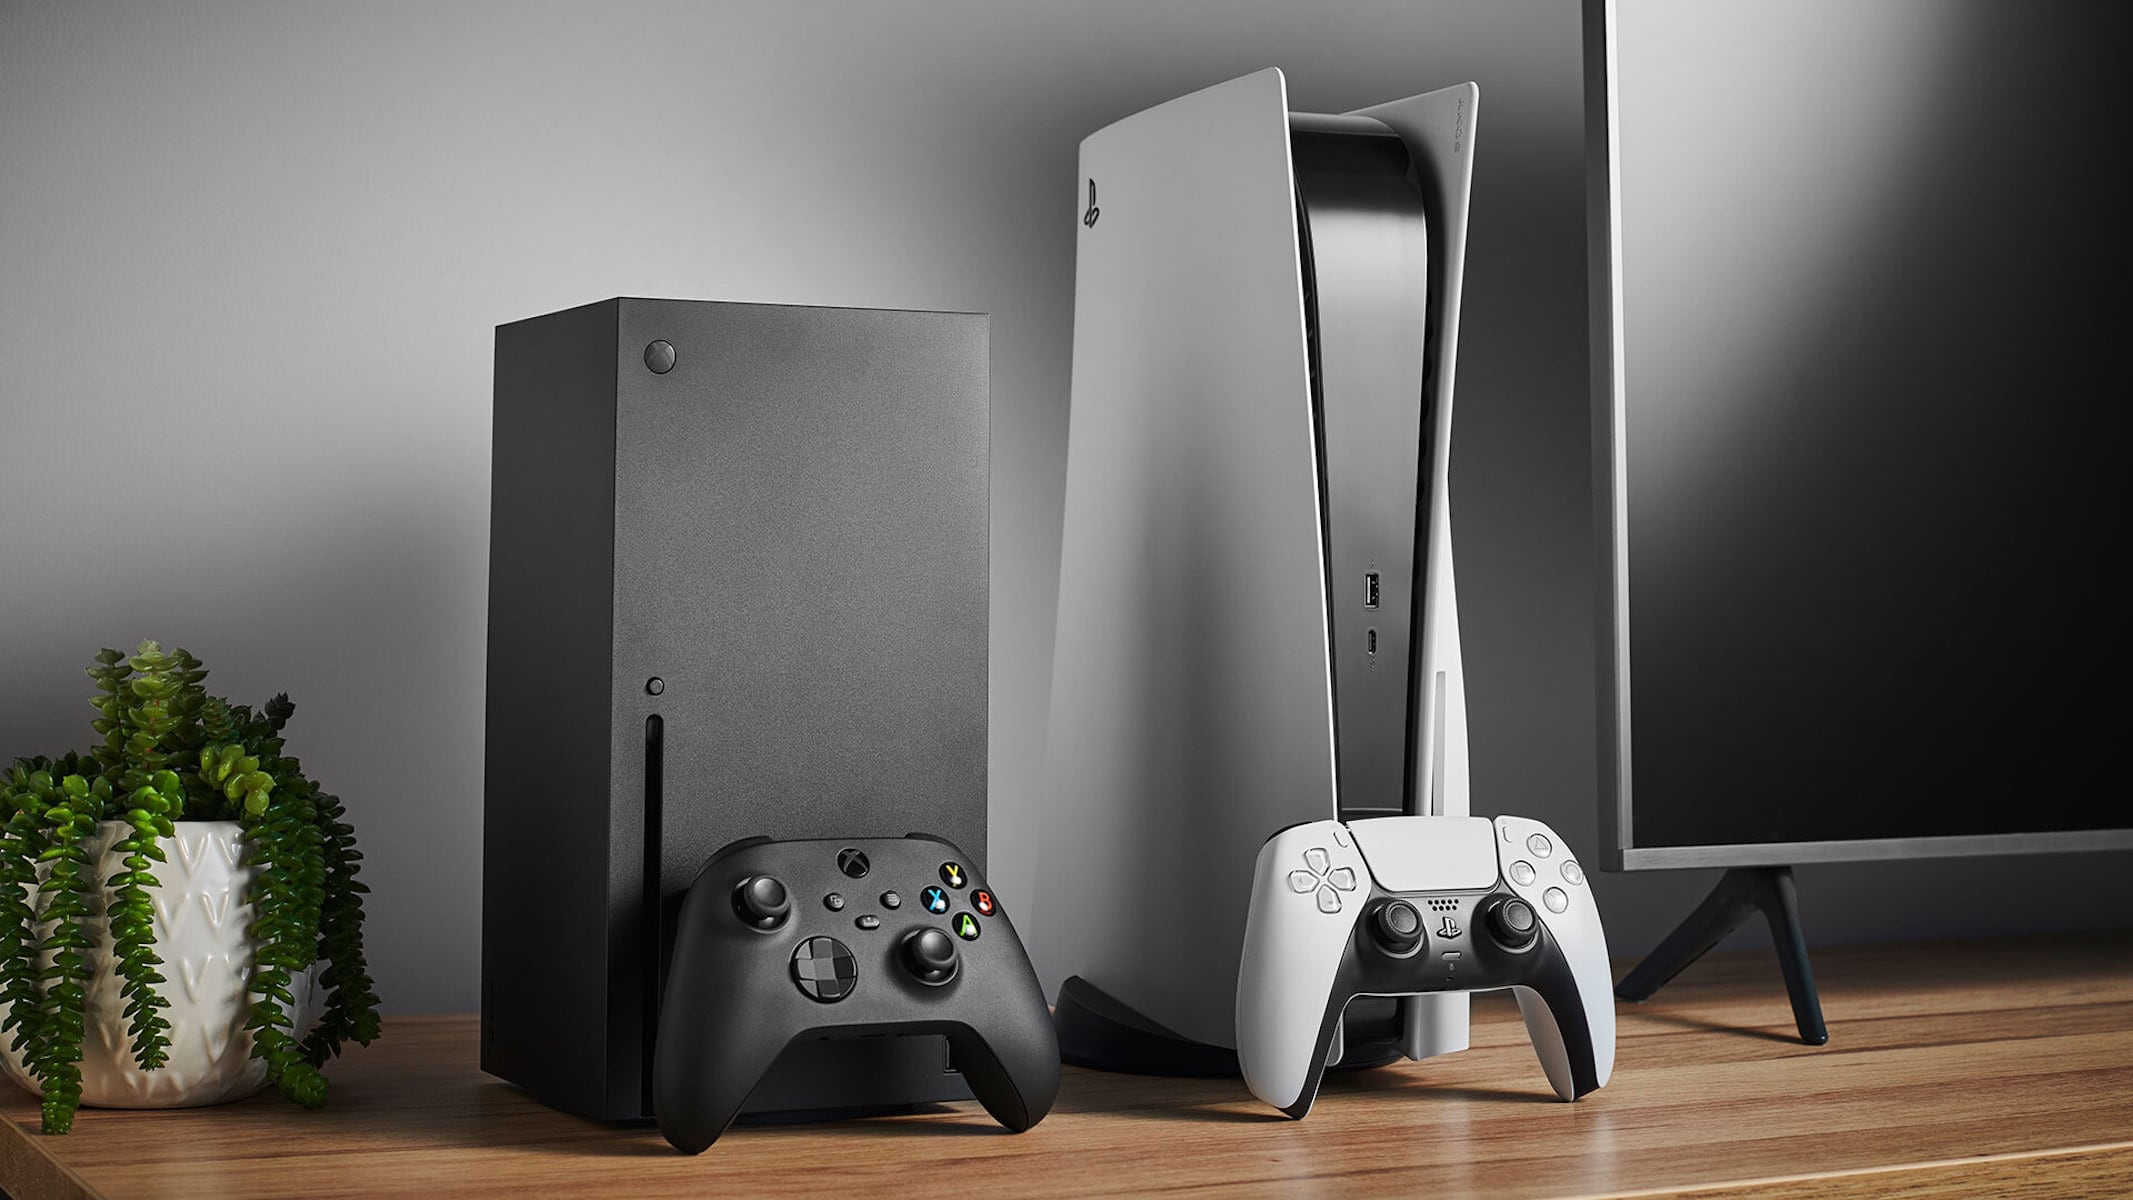 New PS5 and Xbox gadgets for gamers » Gadget Flow